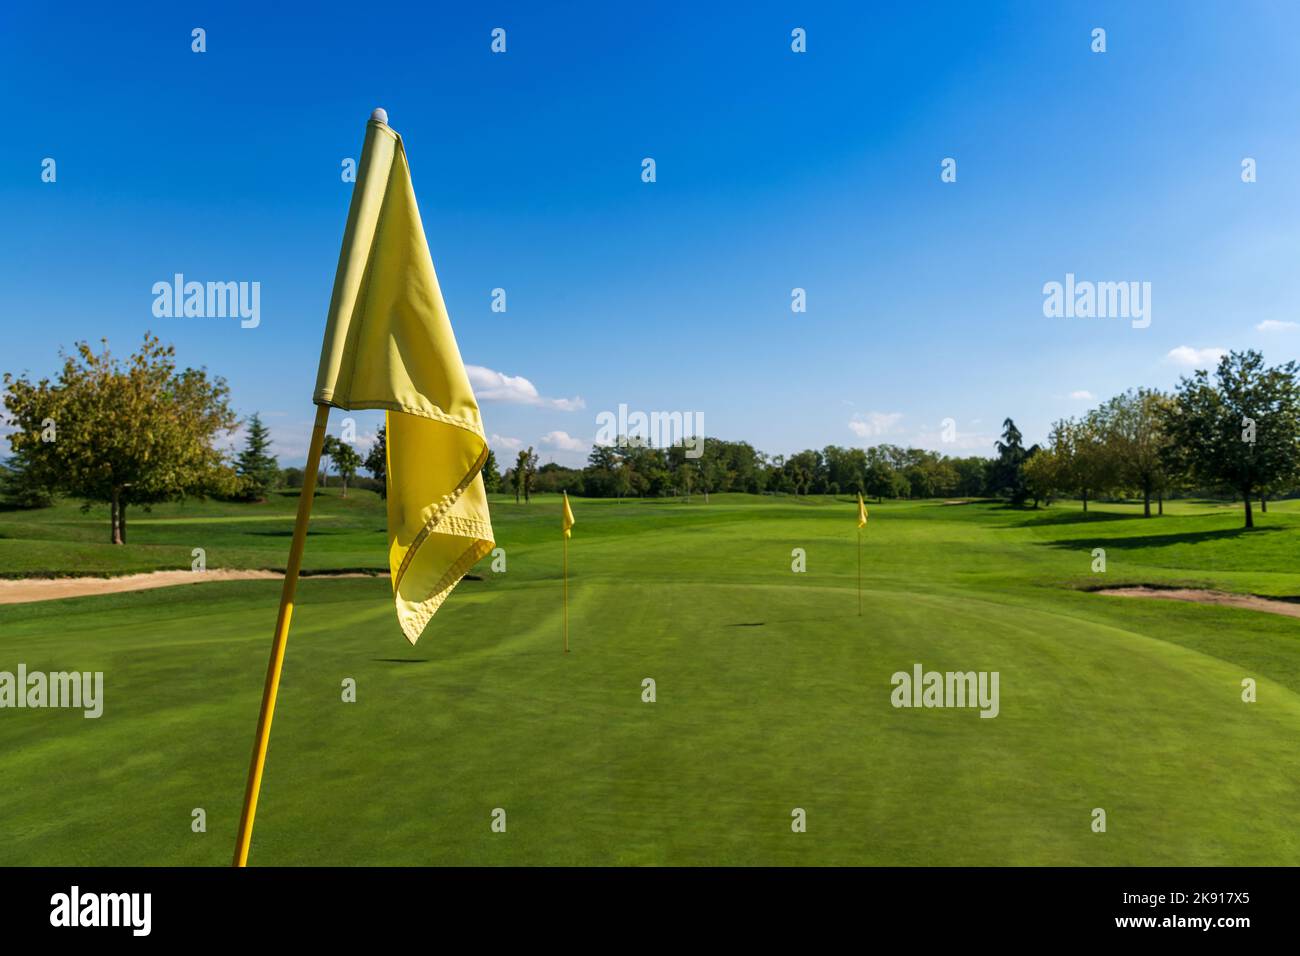 Pole with yellow flag for pin position on green grassy field for golf game in park under blue sky Stock Photo